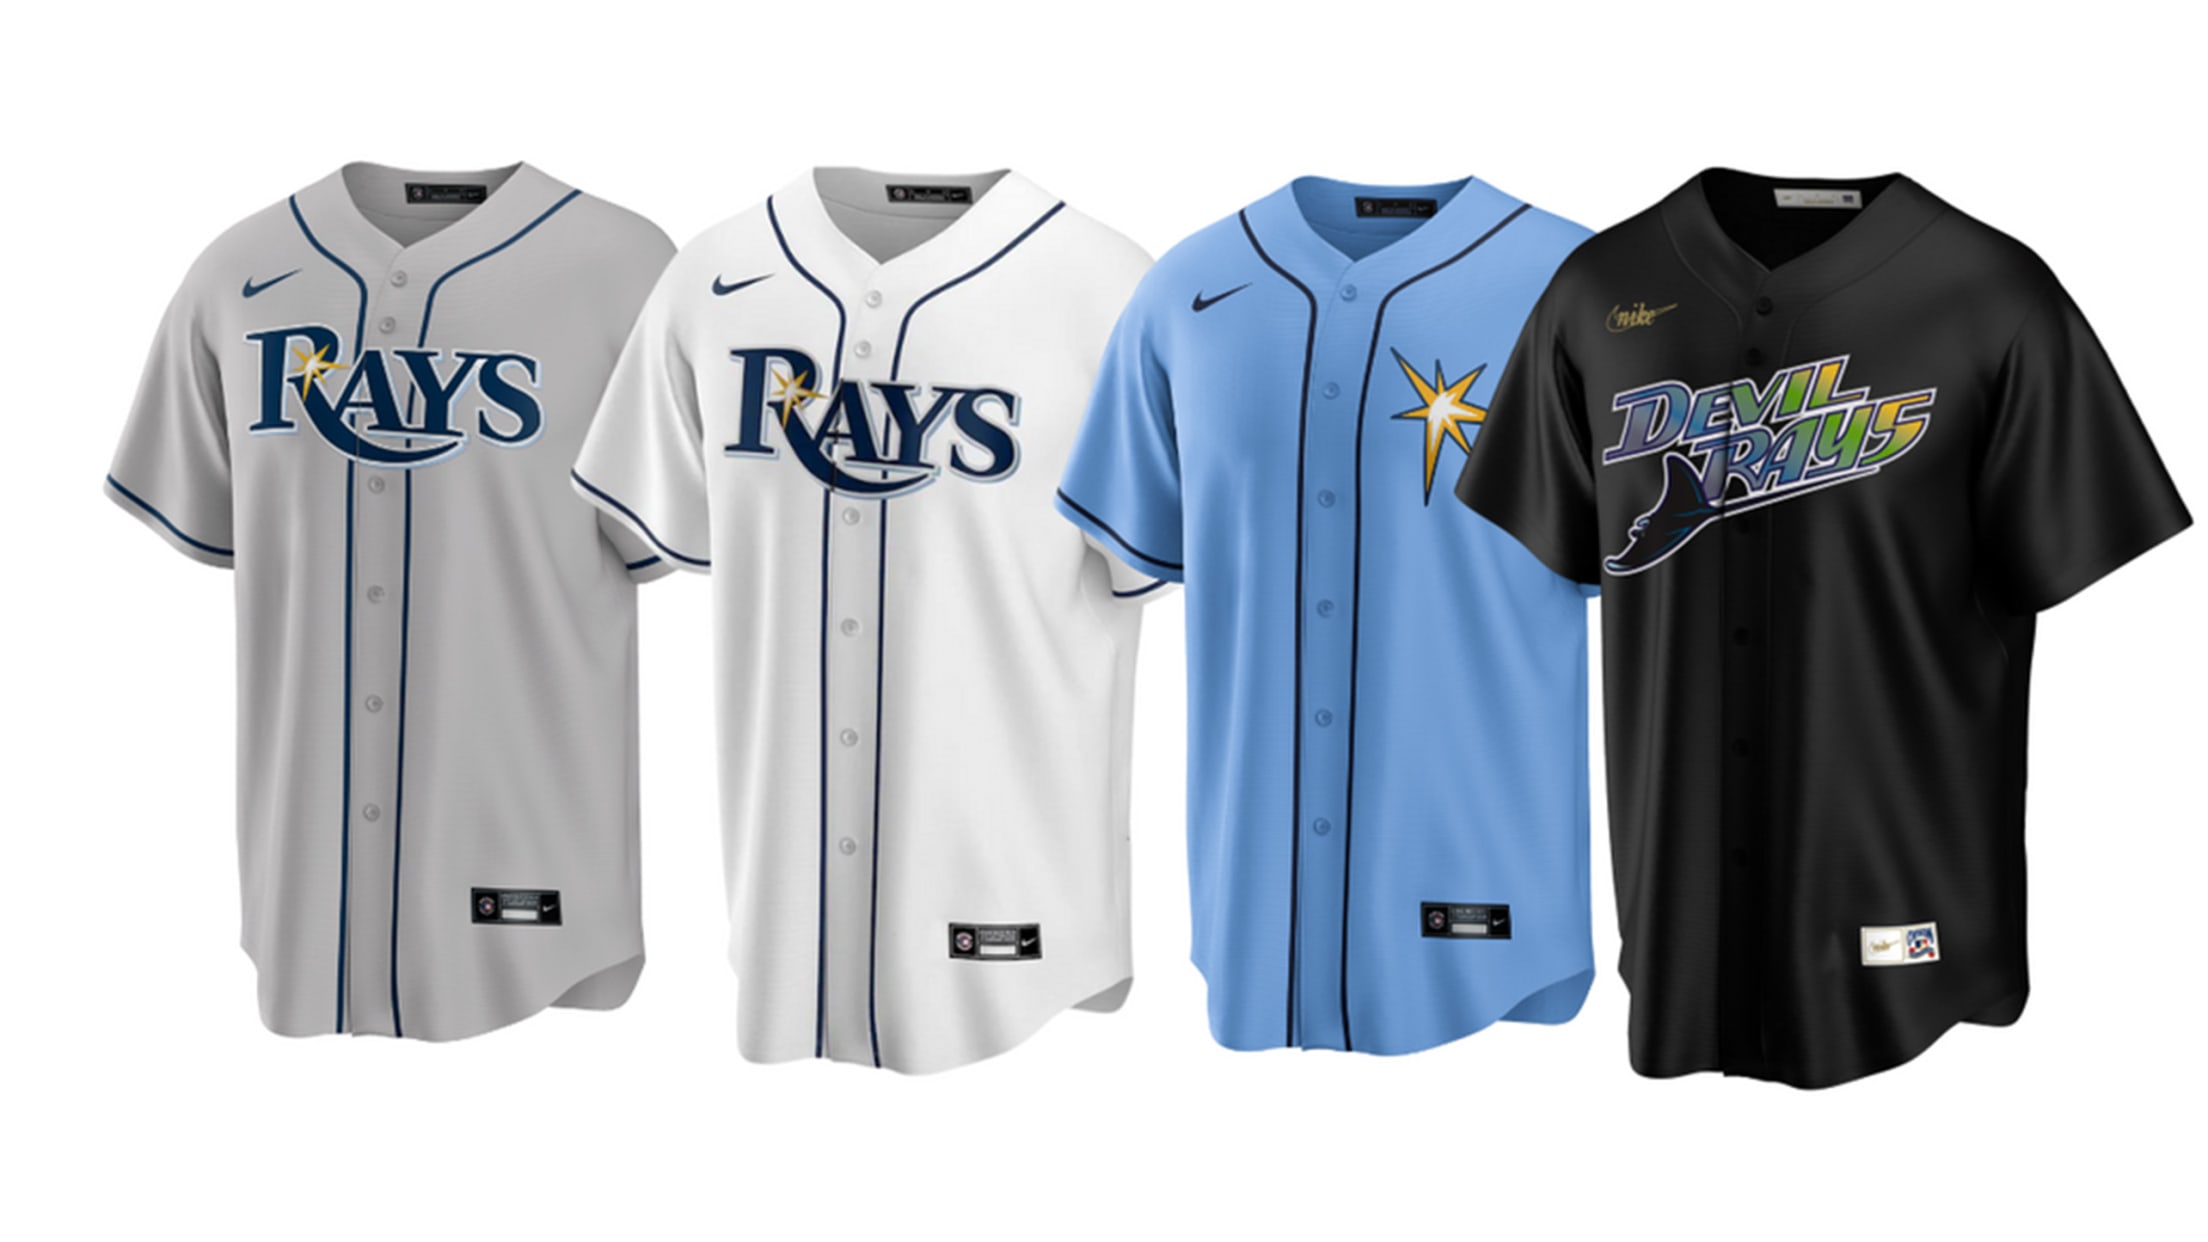 Tampa Bay Rays Gear and Merchandise, Shop All